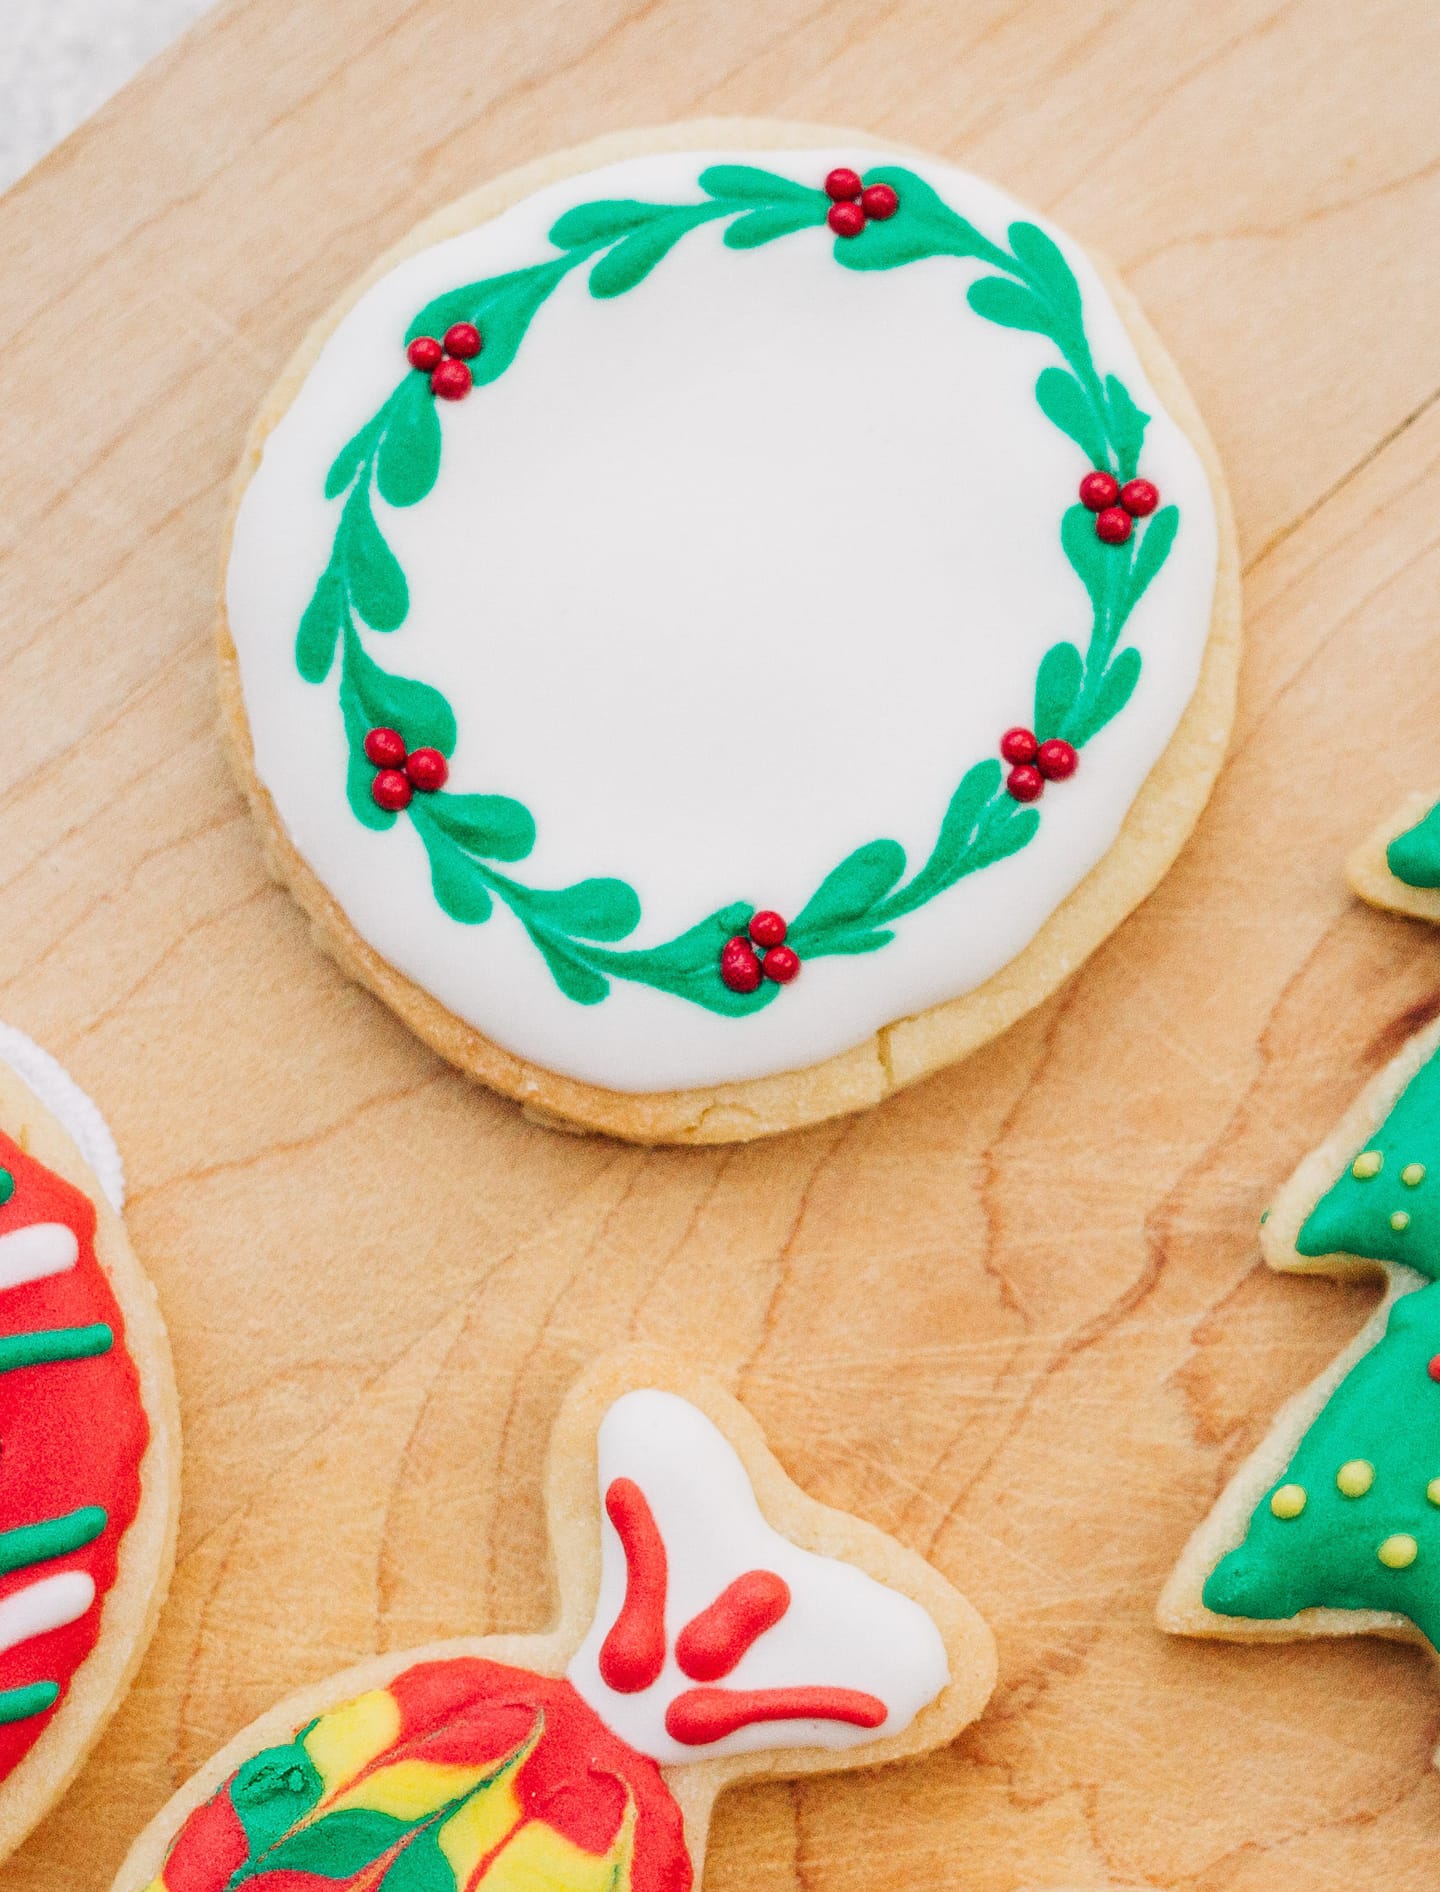 Festively decorated wreath Christmas cookies on a wooden cutting board.